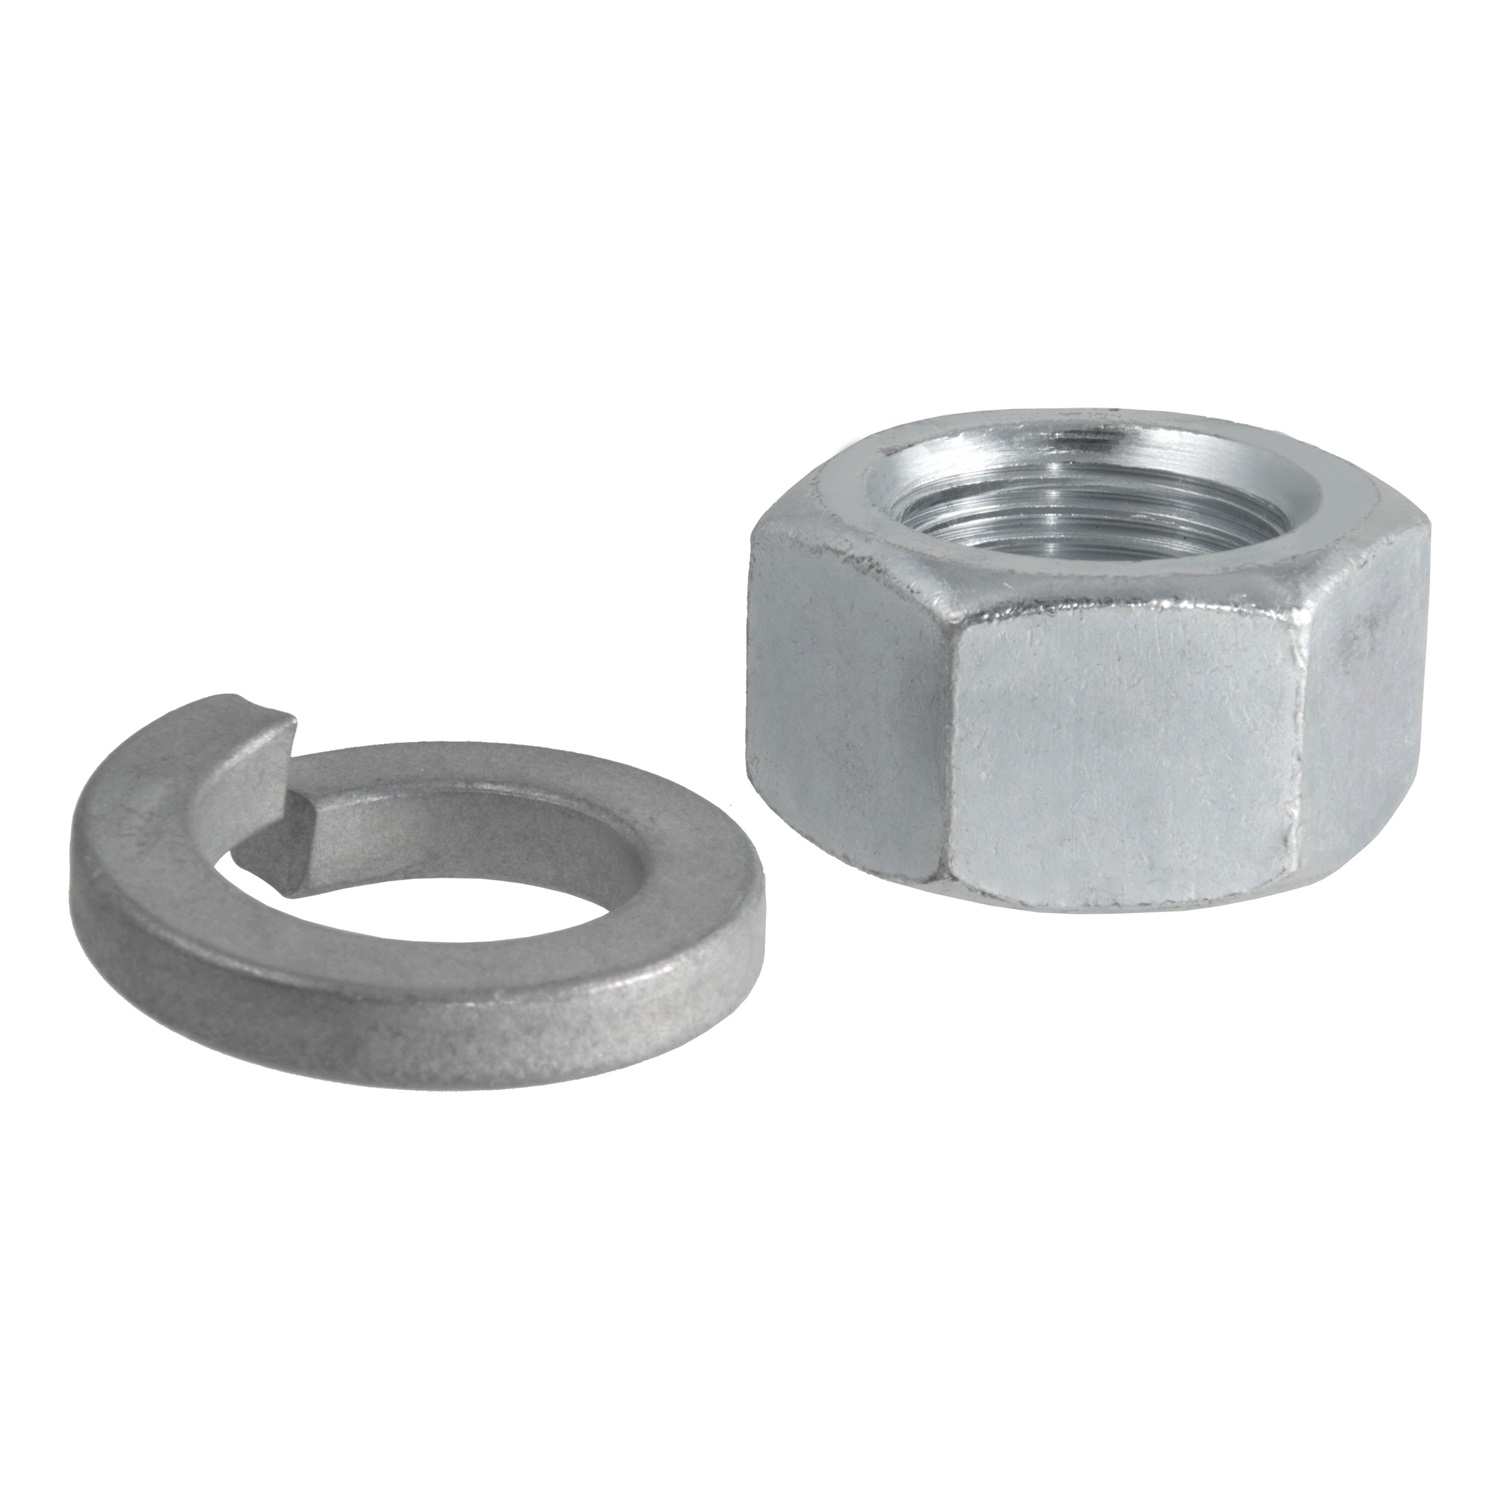 CURT Manufacturing CURT Manufacturing 40104 Nuts And Washers  Fits